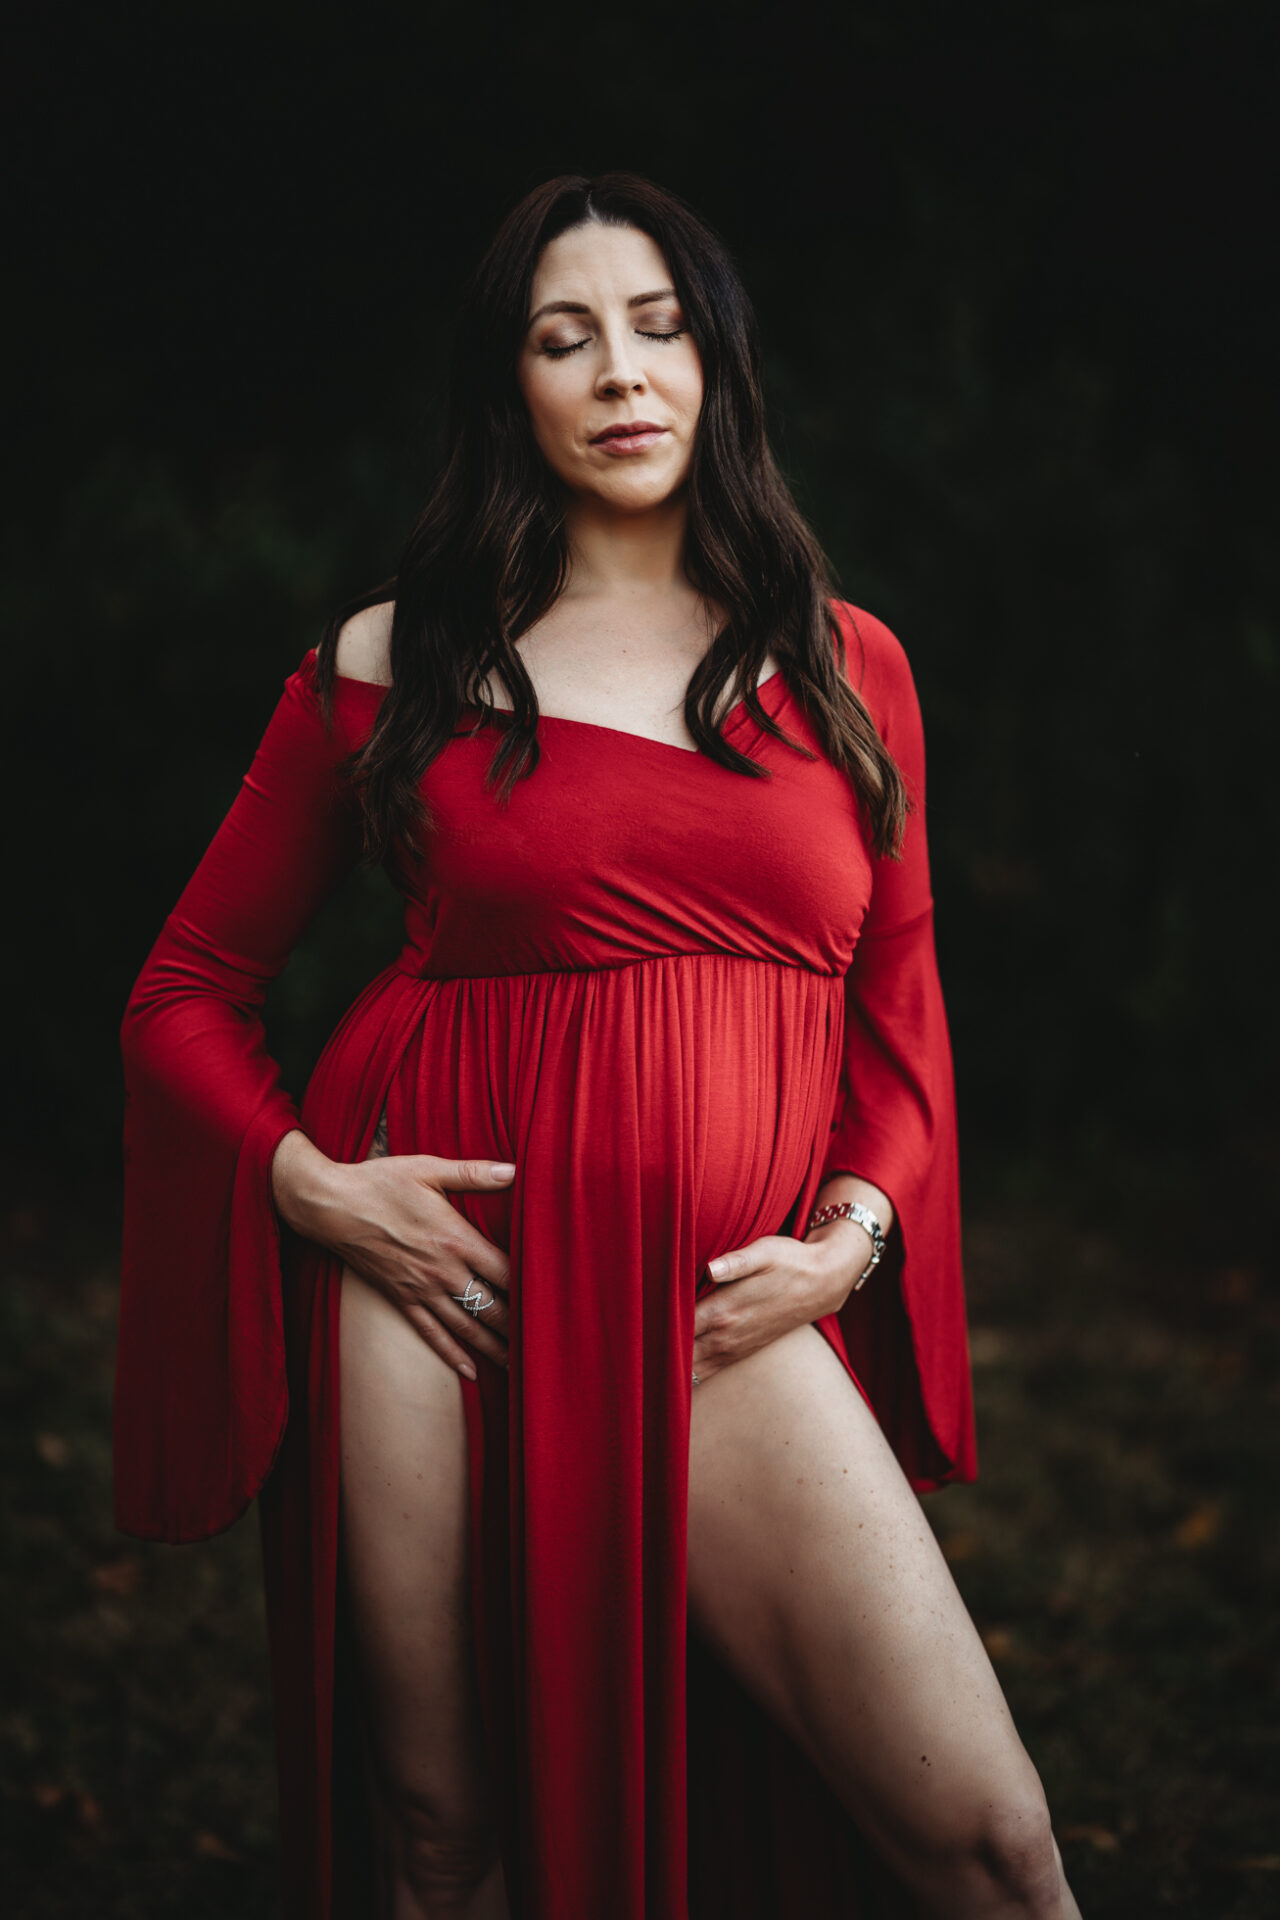 sensual glamorous outdoor maternity pregnancy photo red dress